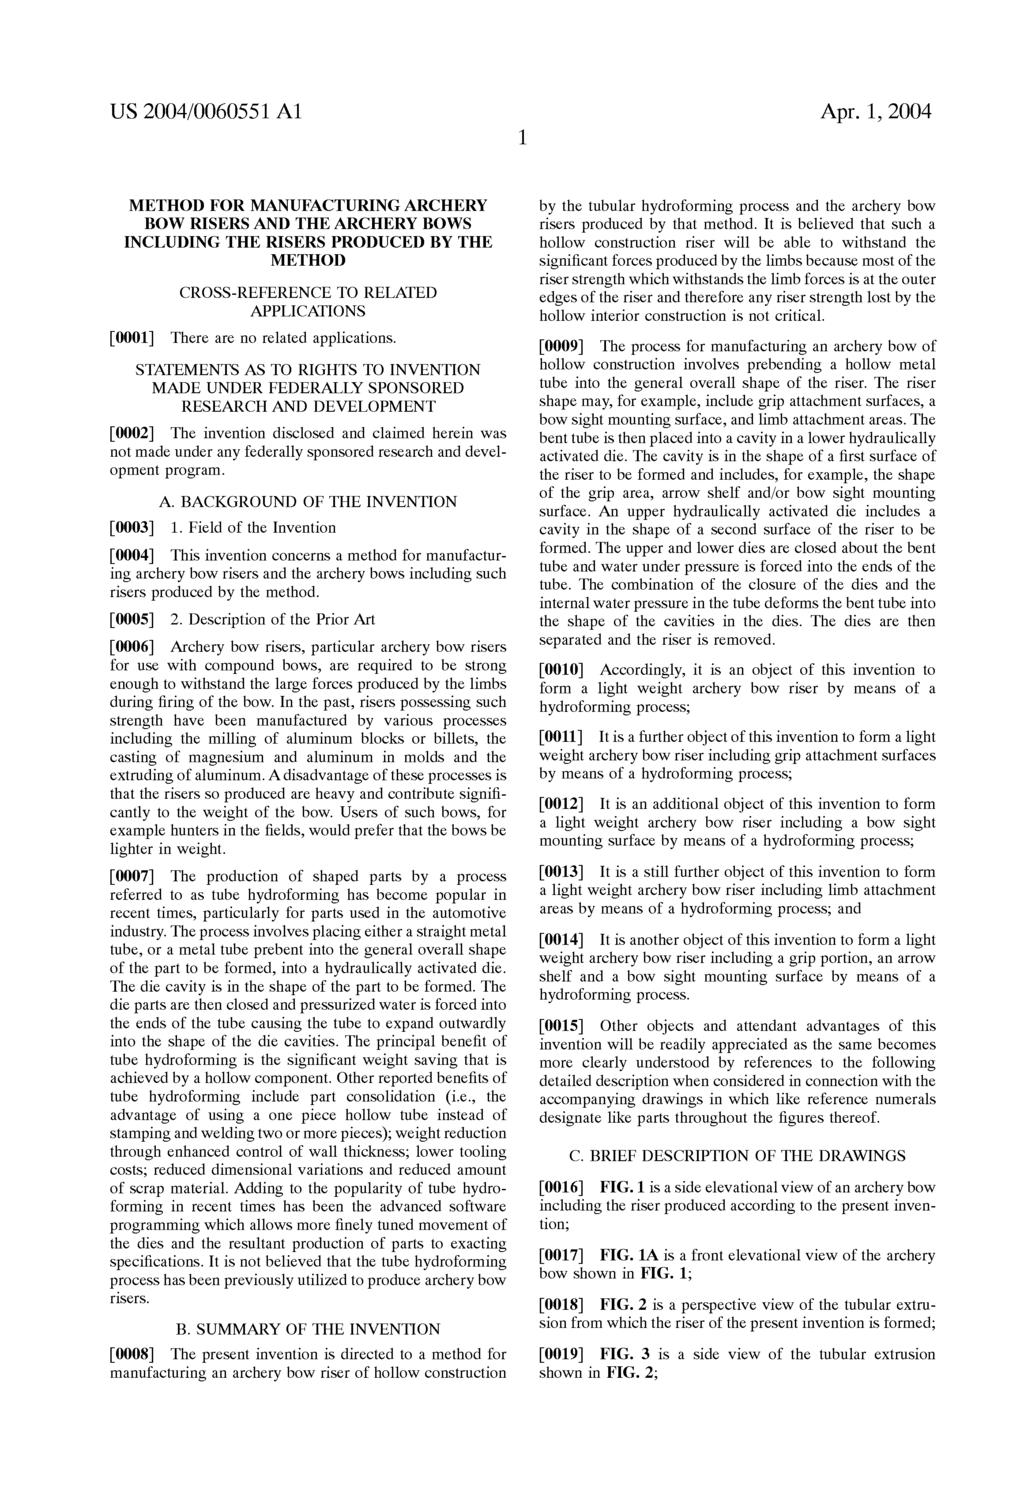 US 2004/0060551A1 Apr. 1, 2004 METHOD FOR MANUFACTURING ARCHERY BOW RISERS AND THE ARCHERY BOWS INCLUDING THE RISERS PRODUCED BY THE METHOD CROSS-REFERENCE TO RELATED APPLICATIONS 0001.